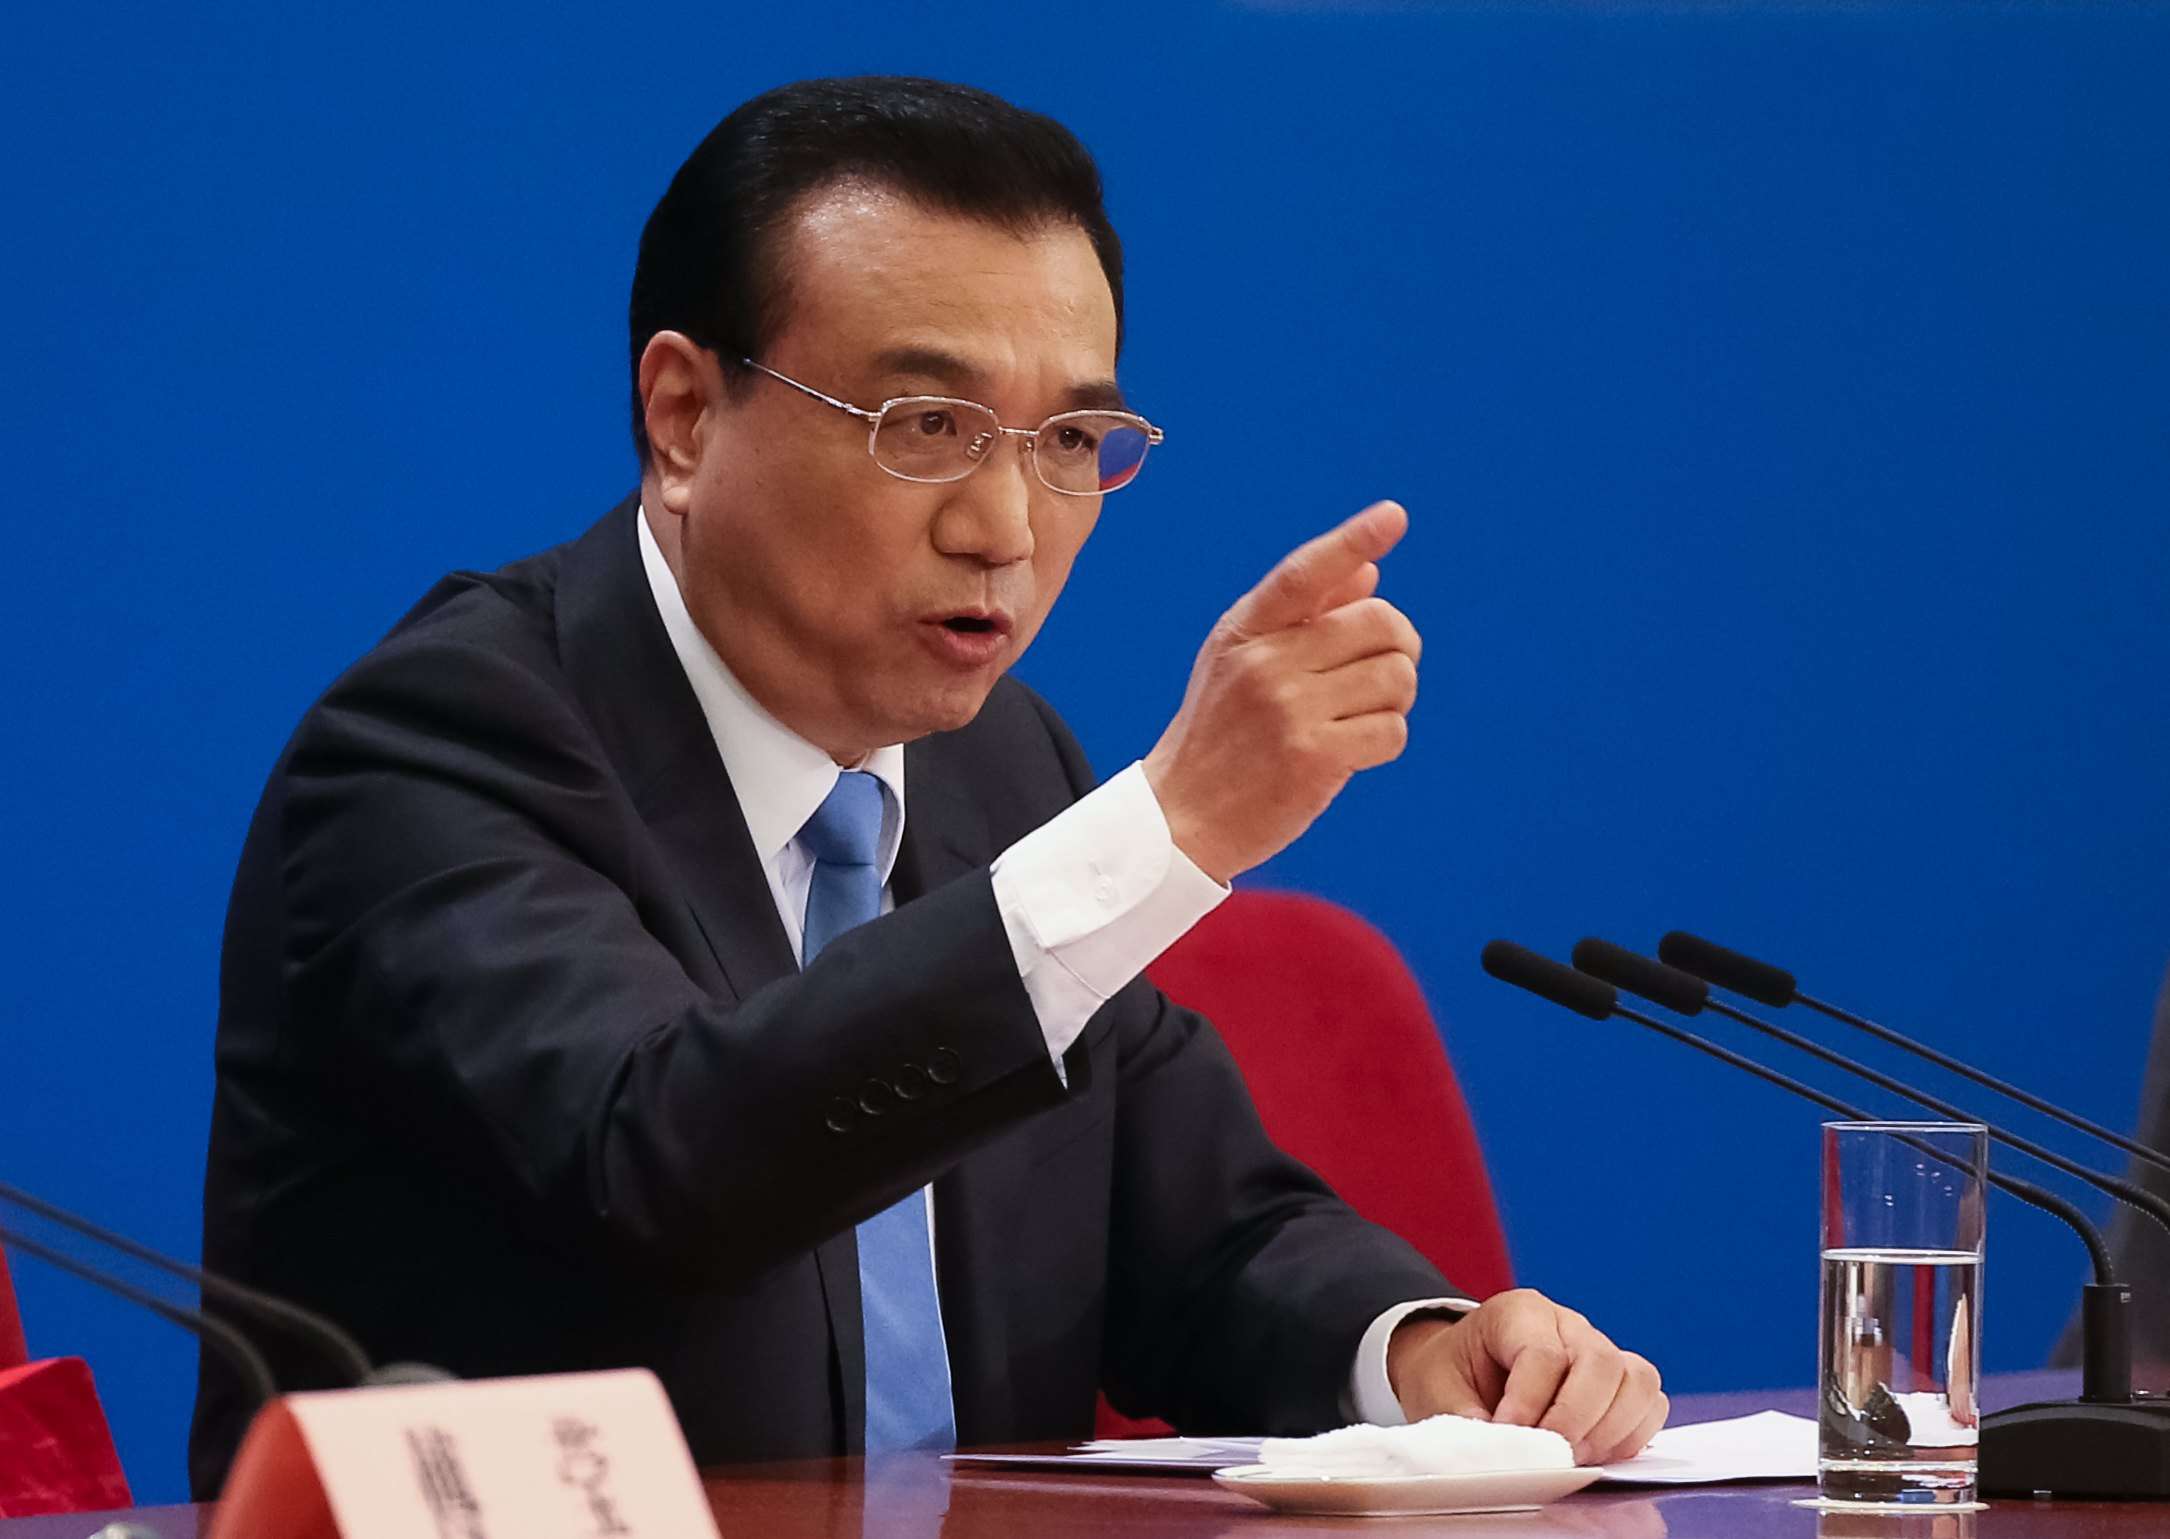 Premier Li Keqiang pictured during his press conference in Beijing. Photo: EPA